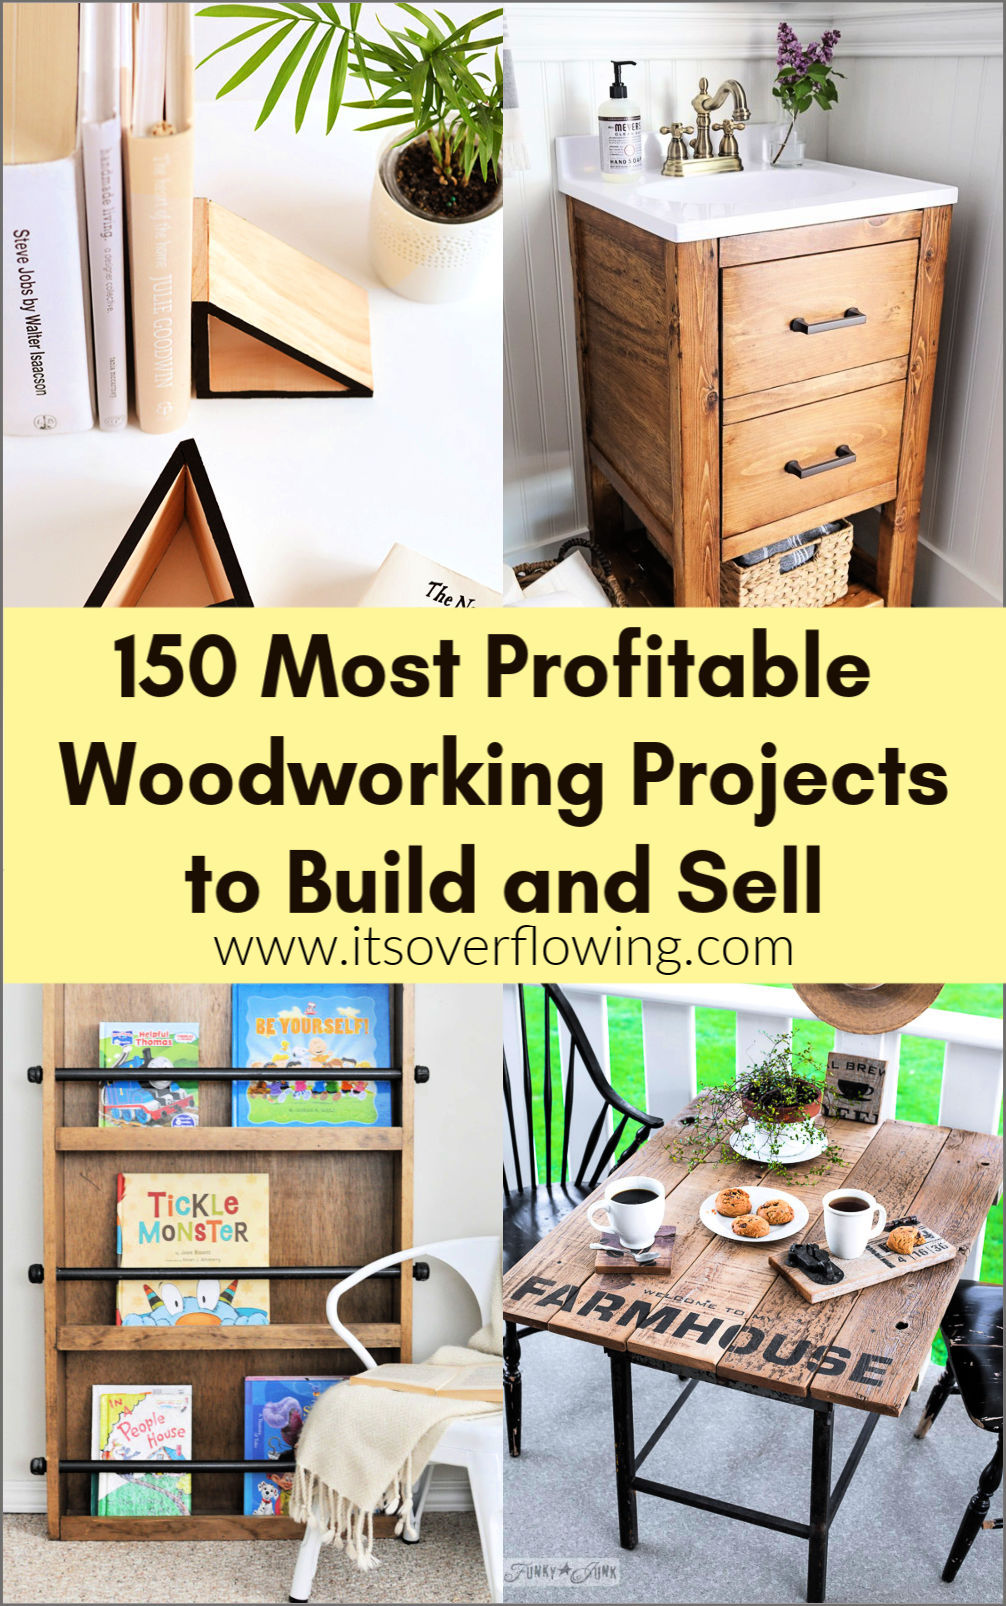 28 Easy Wood Projects for your Home